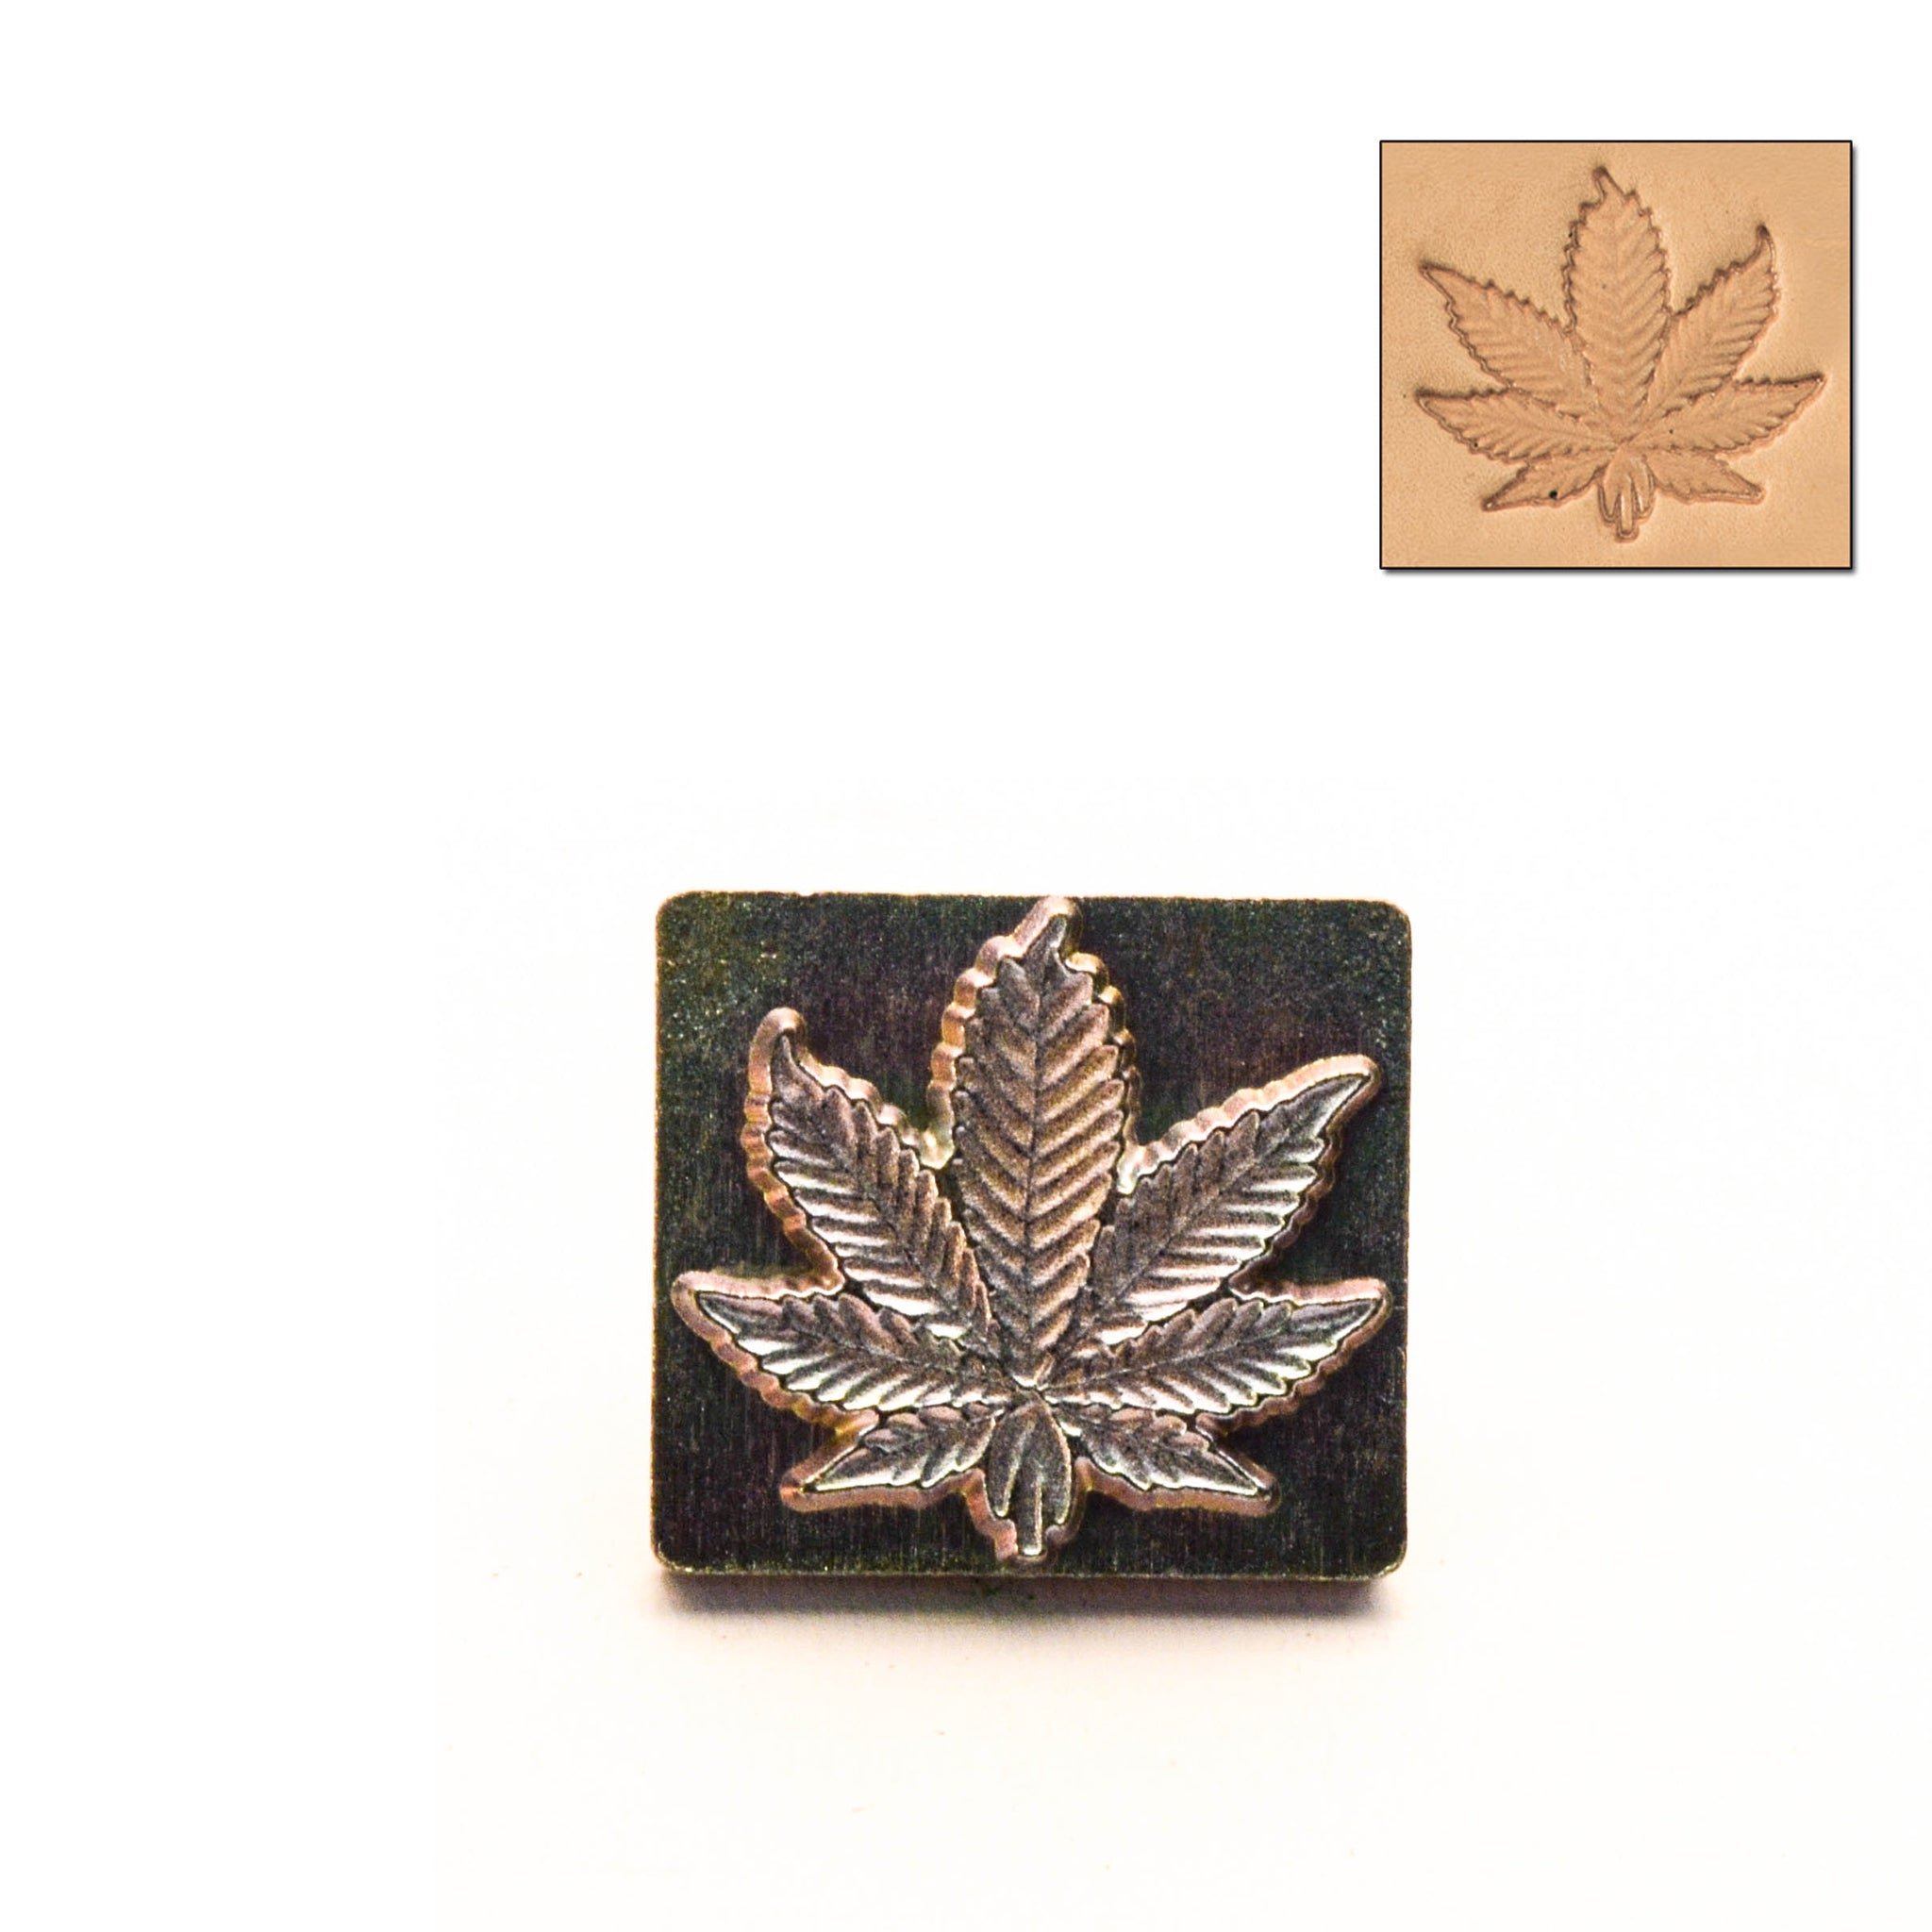 Hemp Leaf 3D Embossing Stamp from Identity Leathercraft